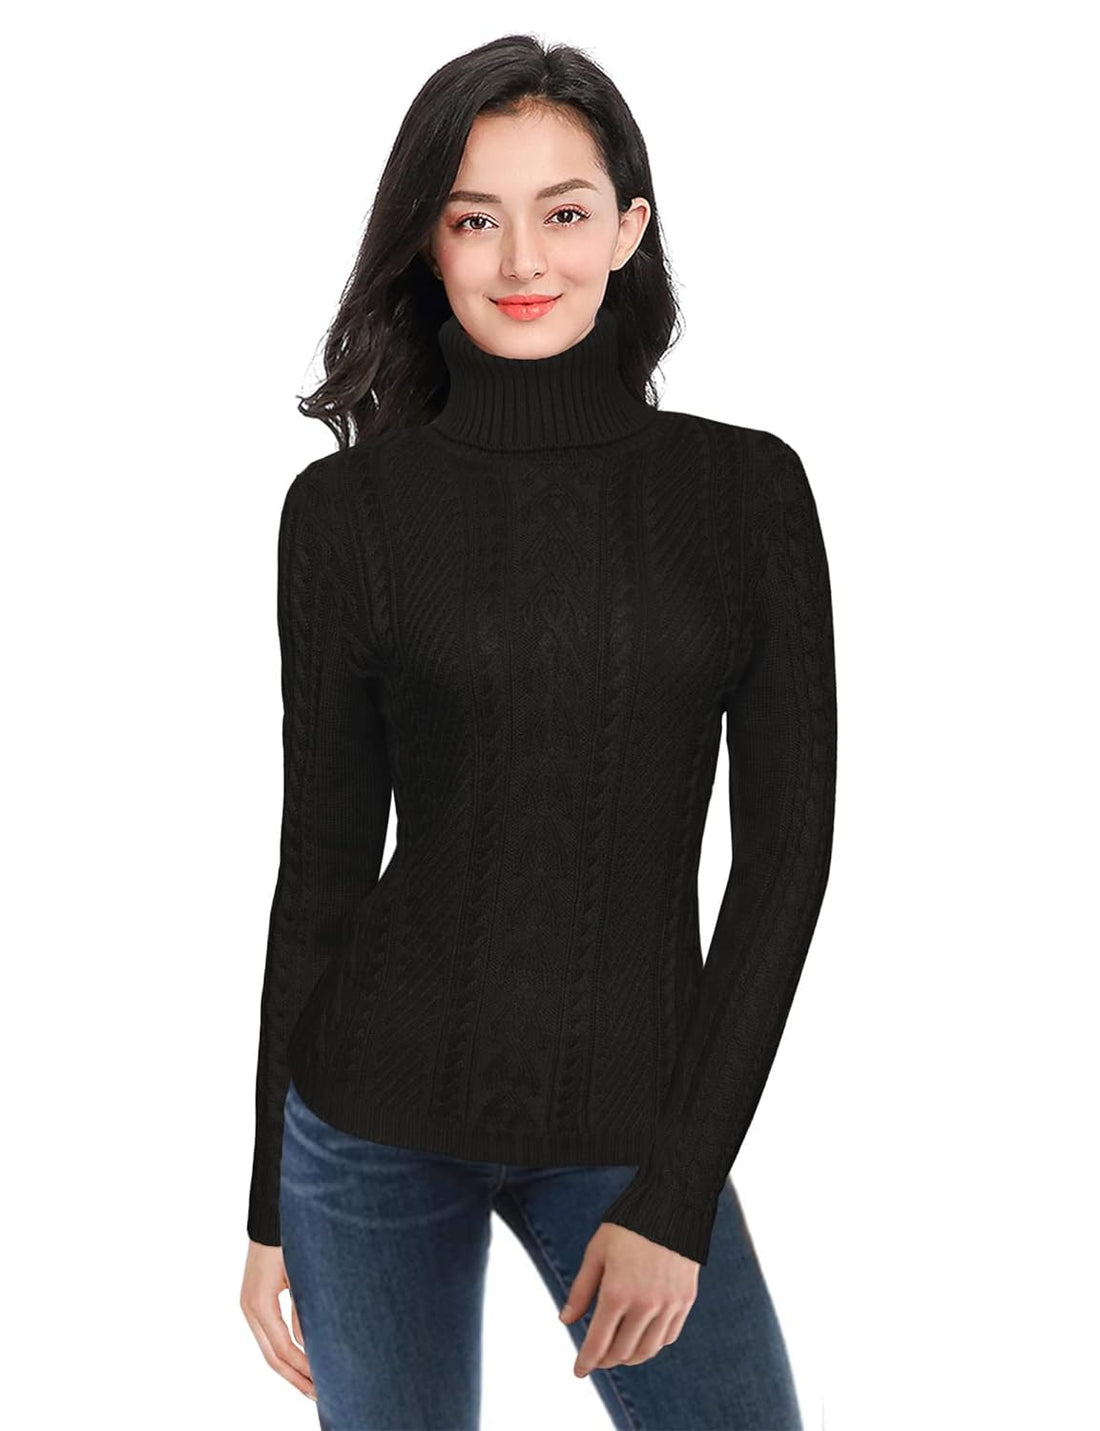 v28 Women Polo Neck Long Slim Fitted Dress Bodycon Turtleneck Cable Knit Sweater, Y Black, X-Large